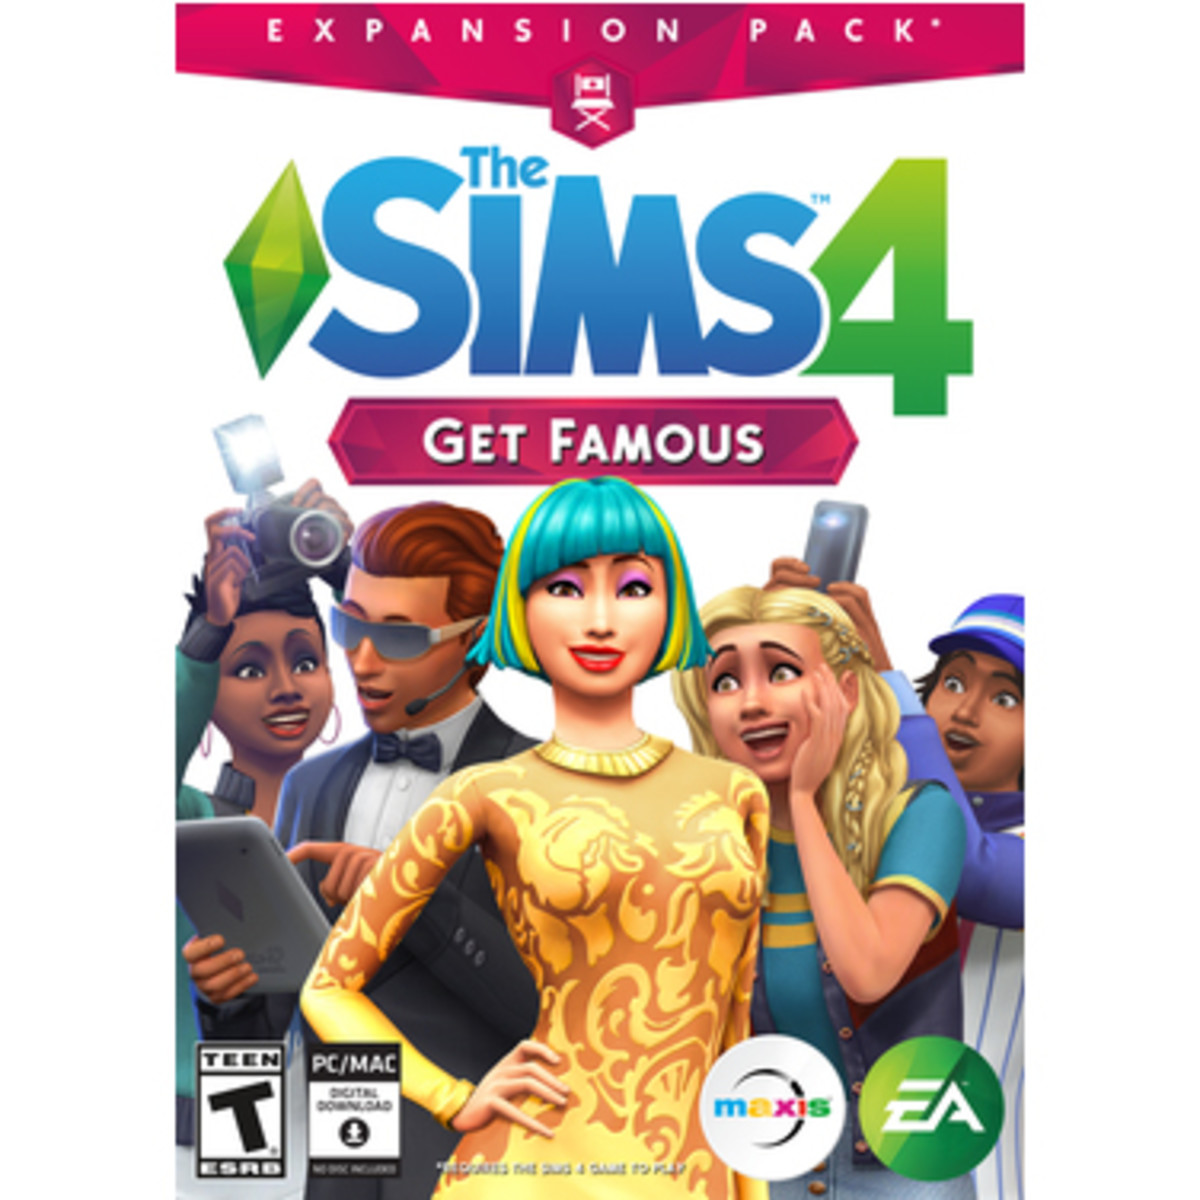 "The Sims 4: Get Famouse" was released in November of 2018. This is one of those packs that changes the way you play the game, but the good news is  your Sims can opt out of fame.